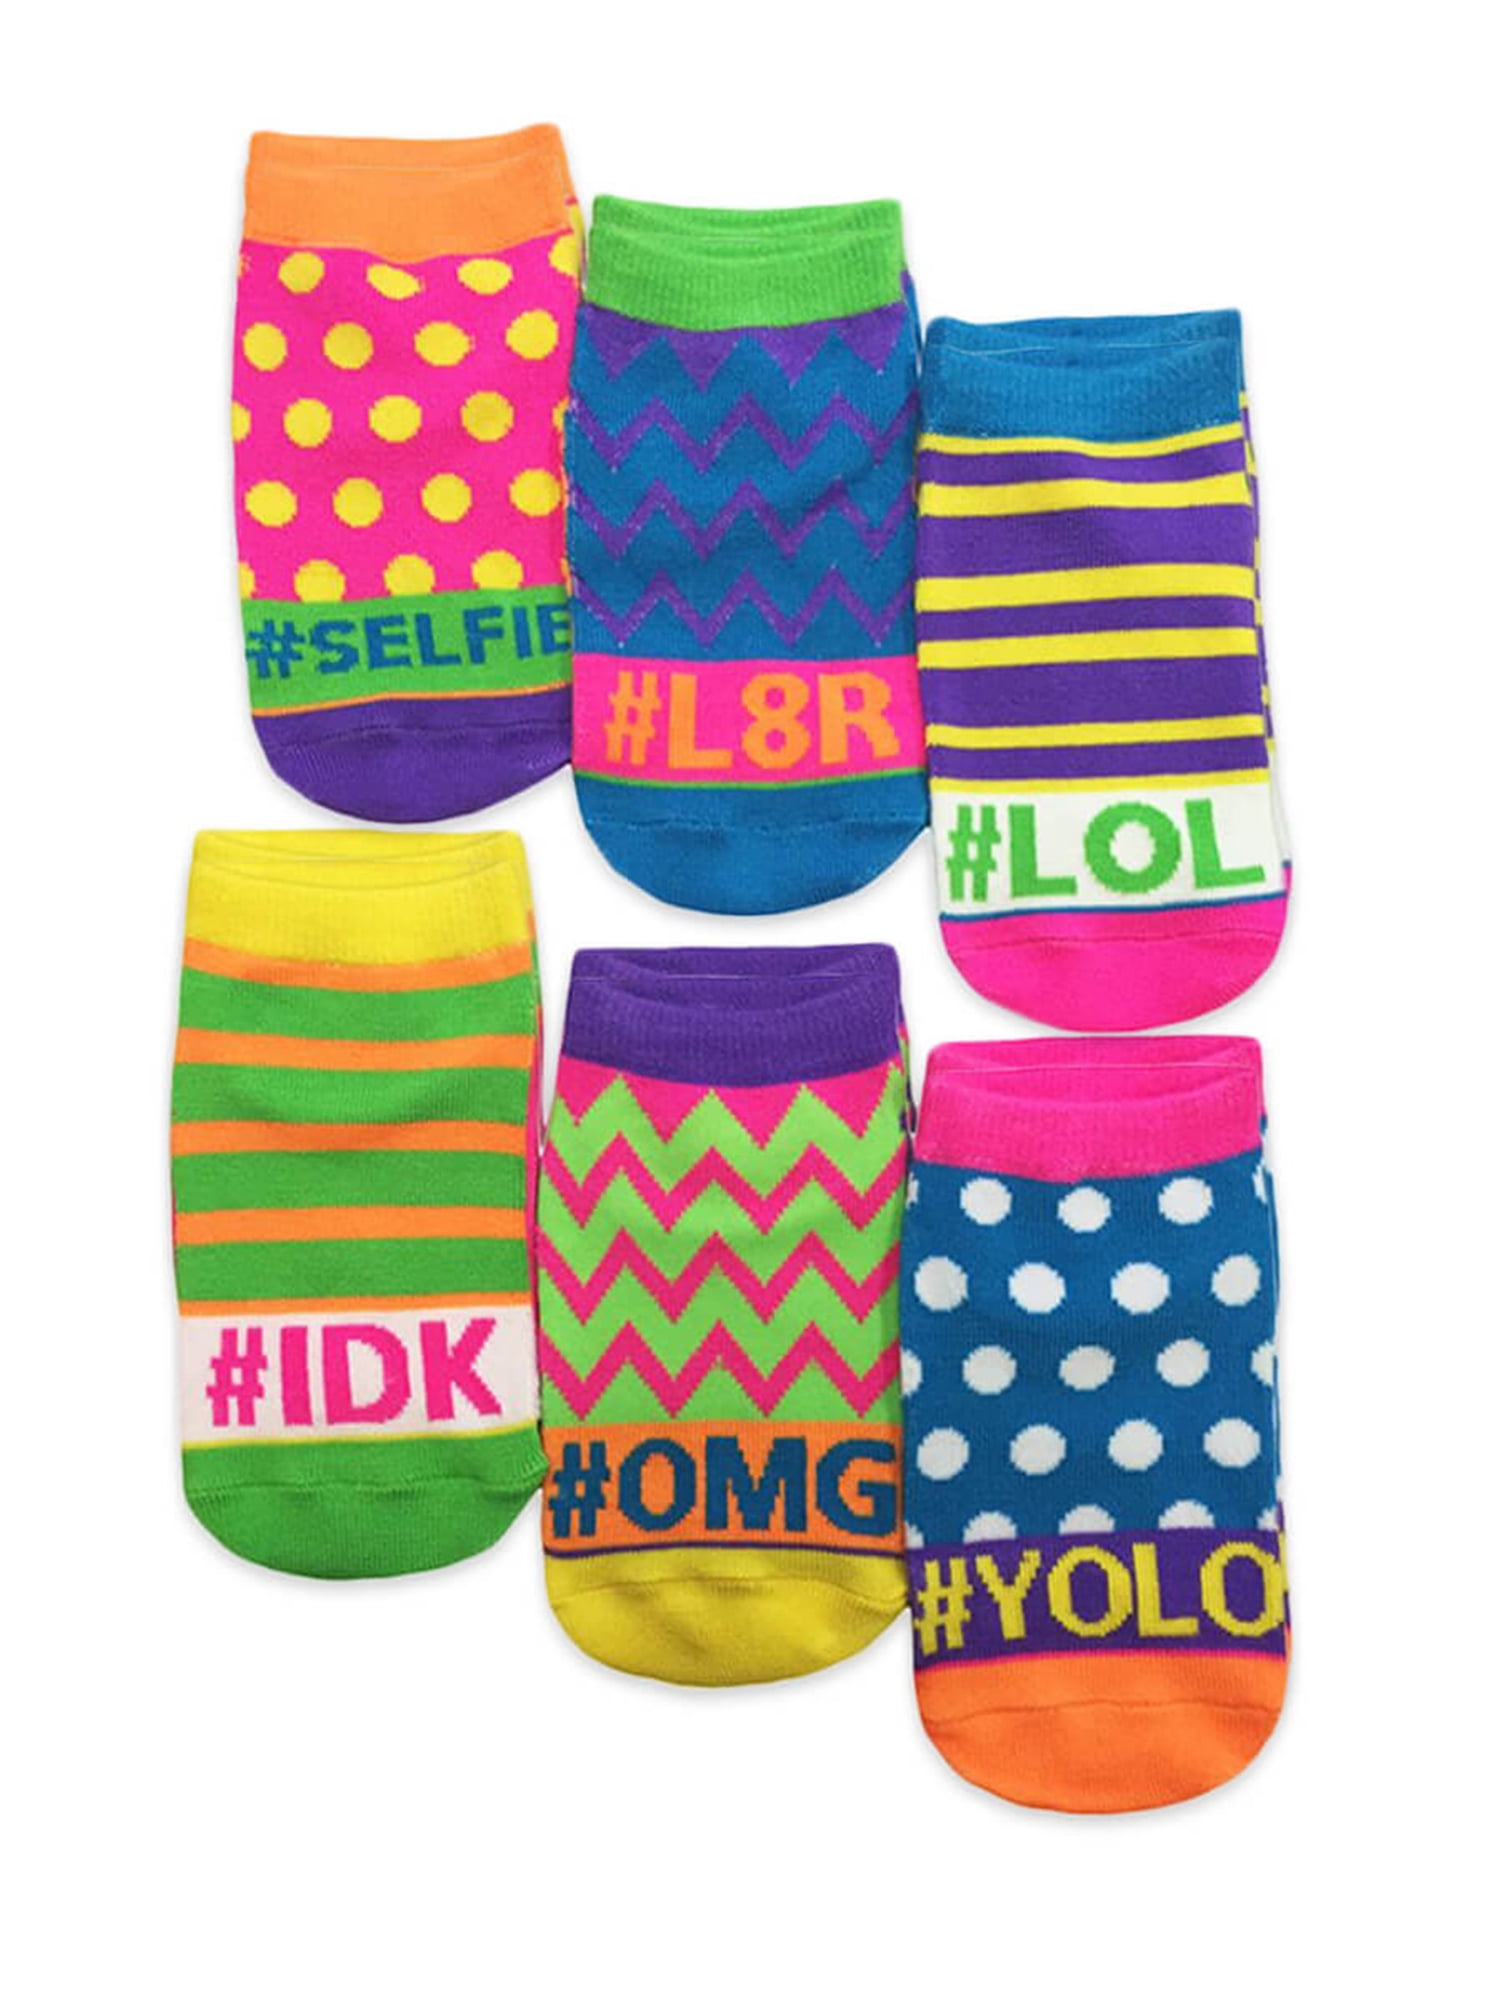 6 PACK Size: 4-7 Plain Neon Yellow Ankle Socks 